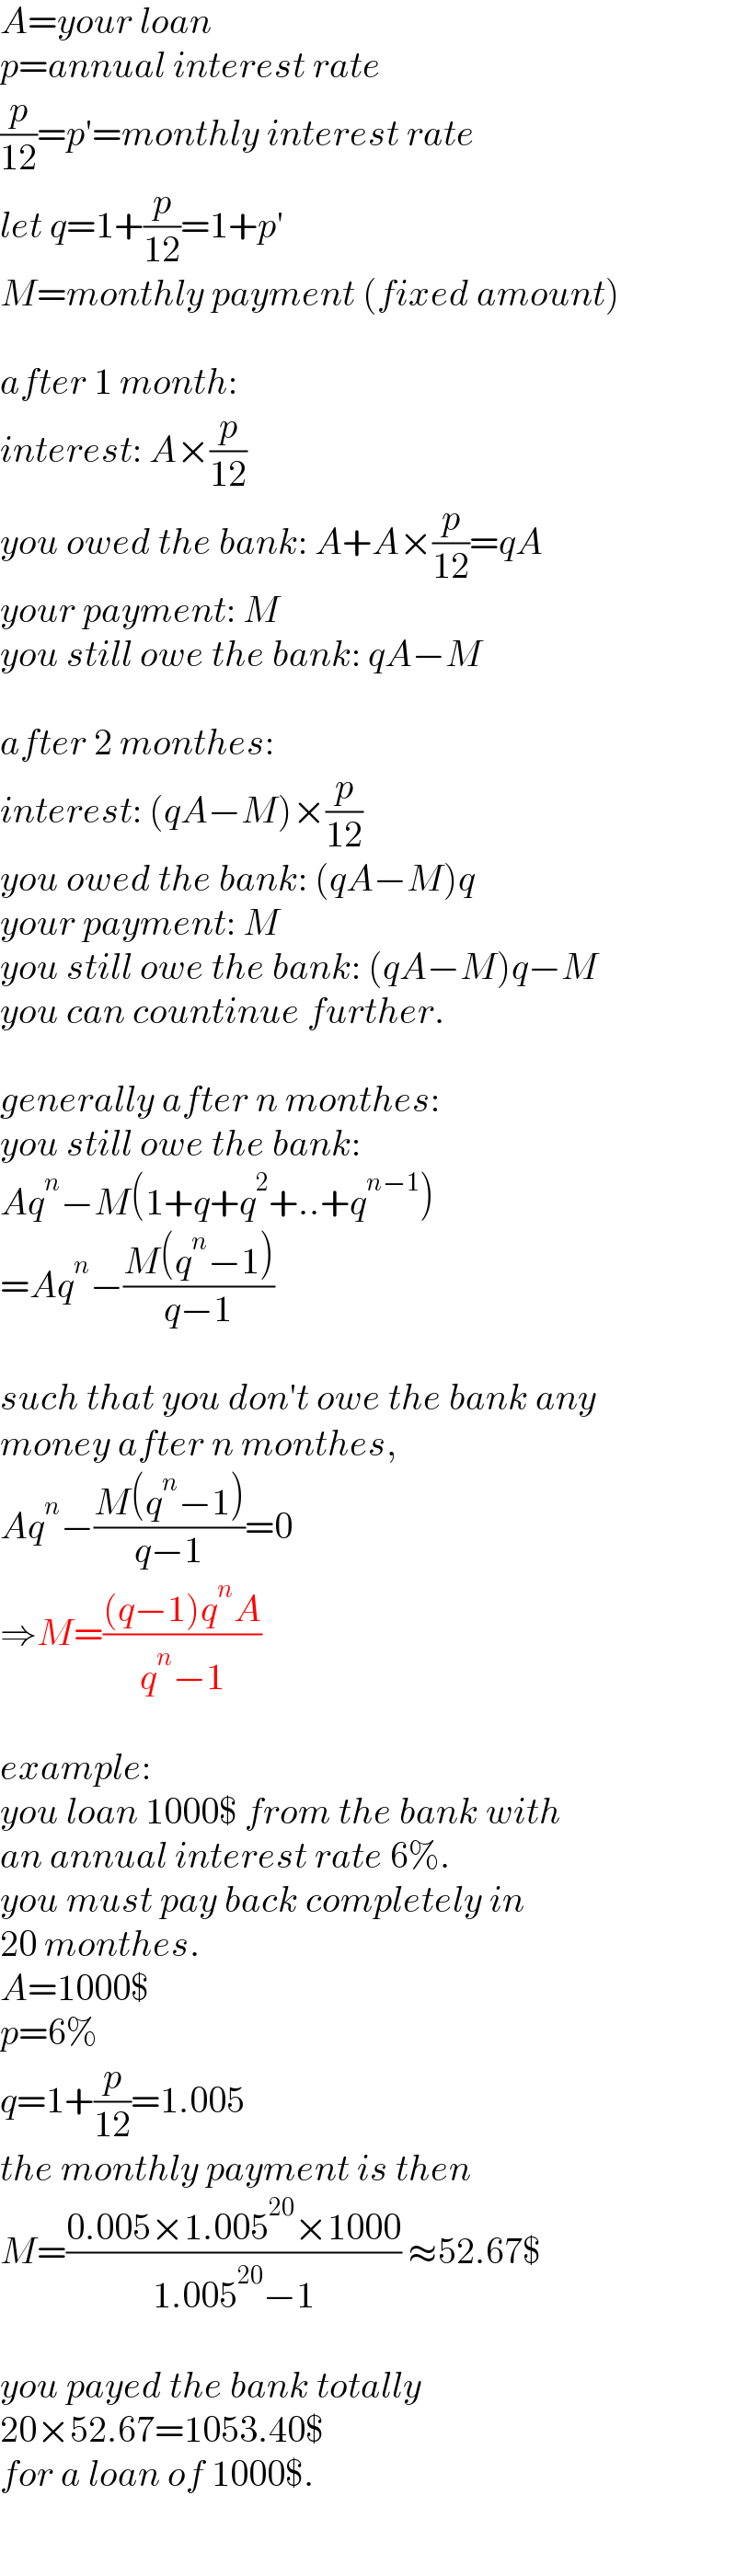 A=your loan  p=annual interest rate  (p/(12))=p′=monthly interest rate  let q=1+(p/(12))=1+p′  M=monthly payment (fixed amount)    after 1 month:  interest: A×(p/(12))  you owed the bank: A+A×(p/(12))=qA  your payment: M  you still owe the bank: qA−M    after 2 monthes:  interest: (qA−M)×(p/(12))  you owed the bank: (qA−M)q  your payment: M  you still owe the bank: (qA−M)q−M  you can countinue further.    generally after n monthes:  you still owe the bank:  Aq^n −M(1+q+q^2 +..+q^(n−1) )  =Aq^n −((M(q^n −1))/(q−1))    such that you don′t owe the bank any  money after n monthes,  Aq^n −((M(q^n −1))/(q−1))=0  ⇒M=(((q−1)q^n A)/(q^n −1))    example:   you loan 1000$ from the bank with  an annual interest rate 6%.  you must pay back completely in  20 monthes.  A=1000$  p=6%  q=1+(p/(12))=1.005  the monthly payment is then  M=((0.005×1.005^(20) ×1000)/(1.005^(20) −1)) ≈52.67$    you payed the bank totally   20×52.67=1053.40$  for a loan of 1000$.  